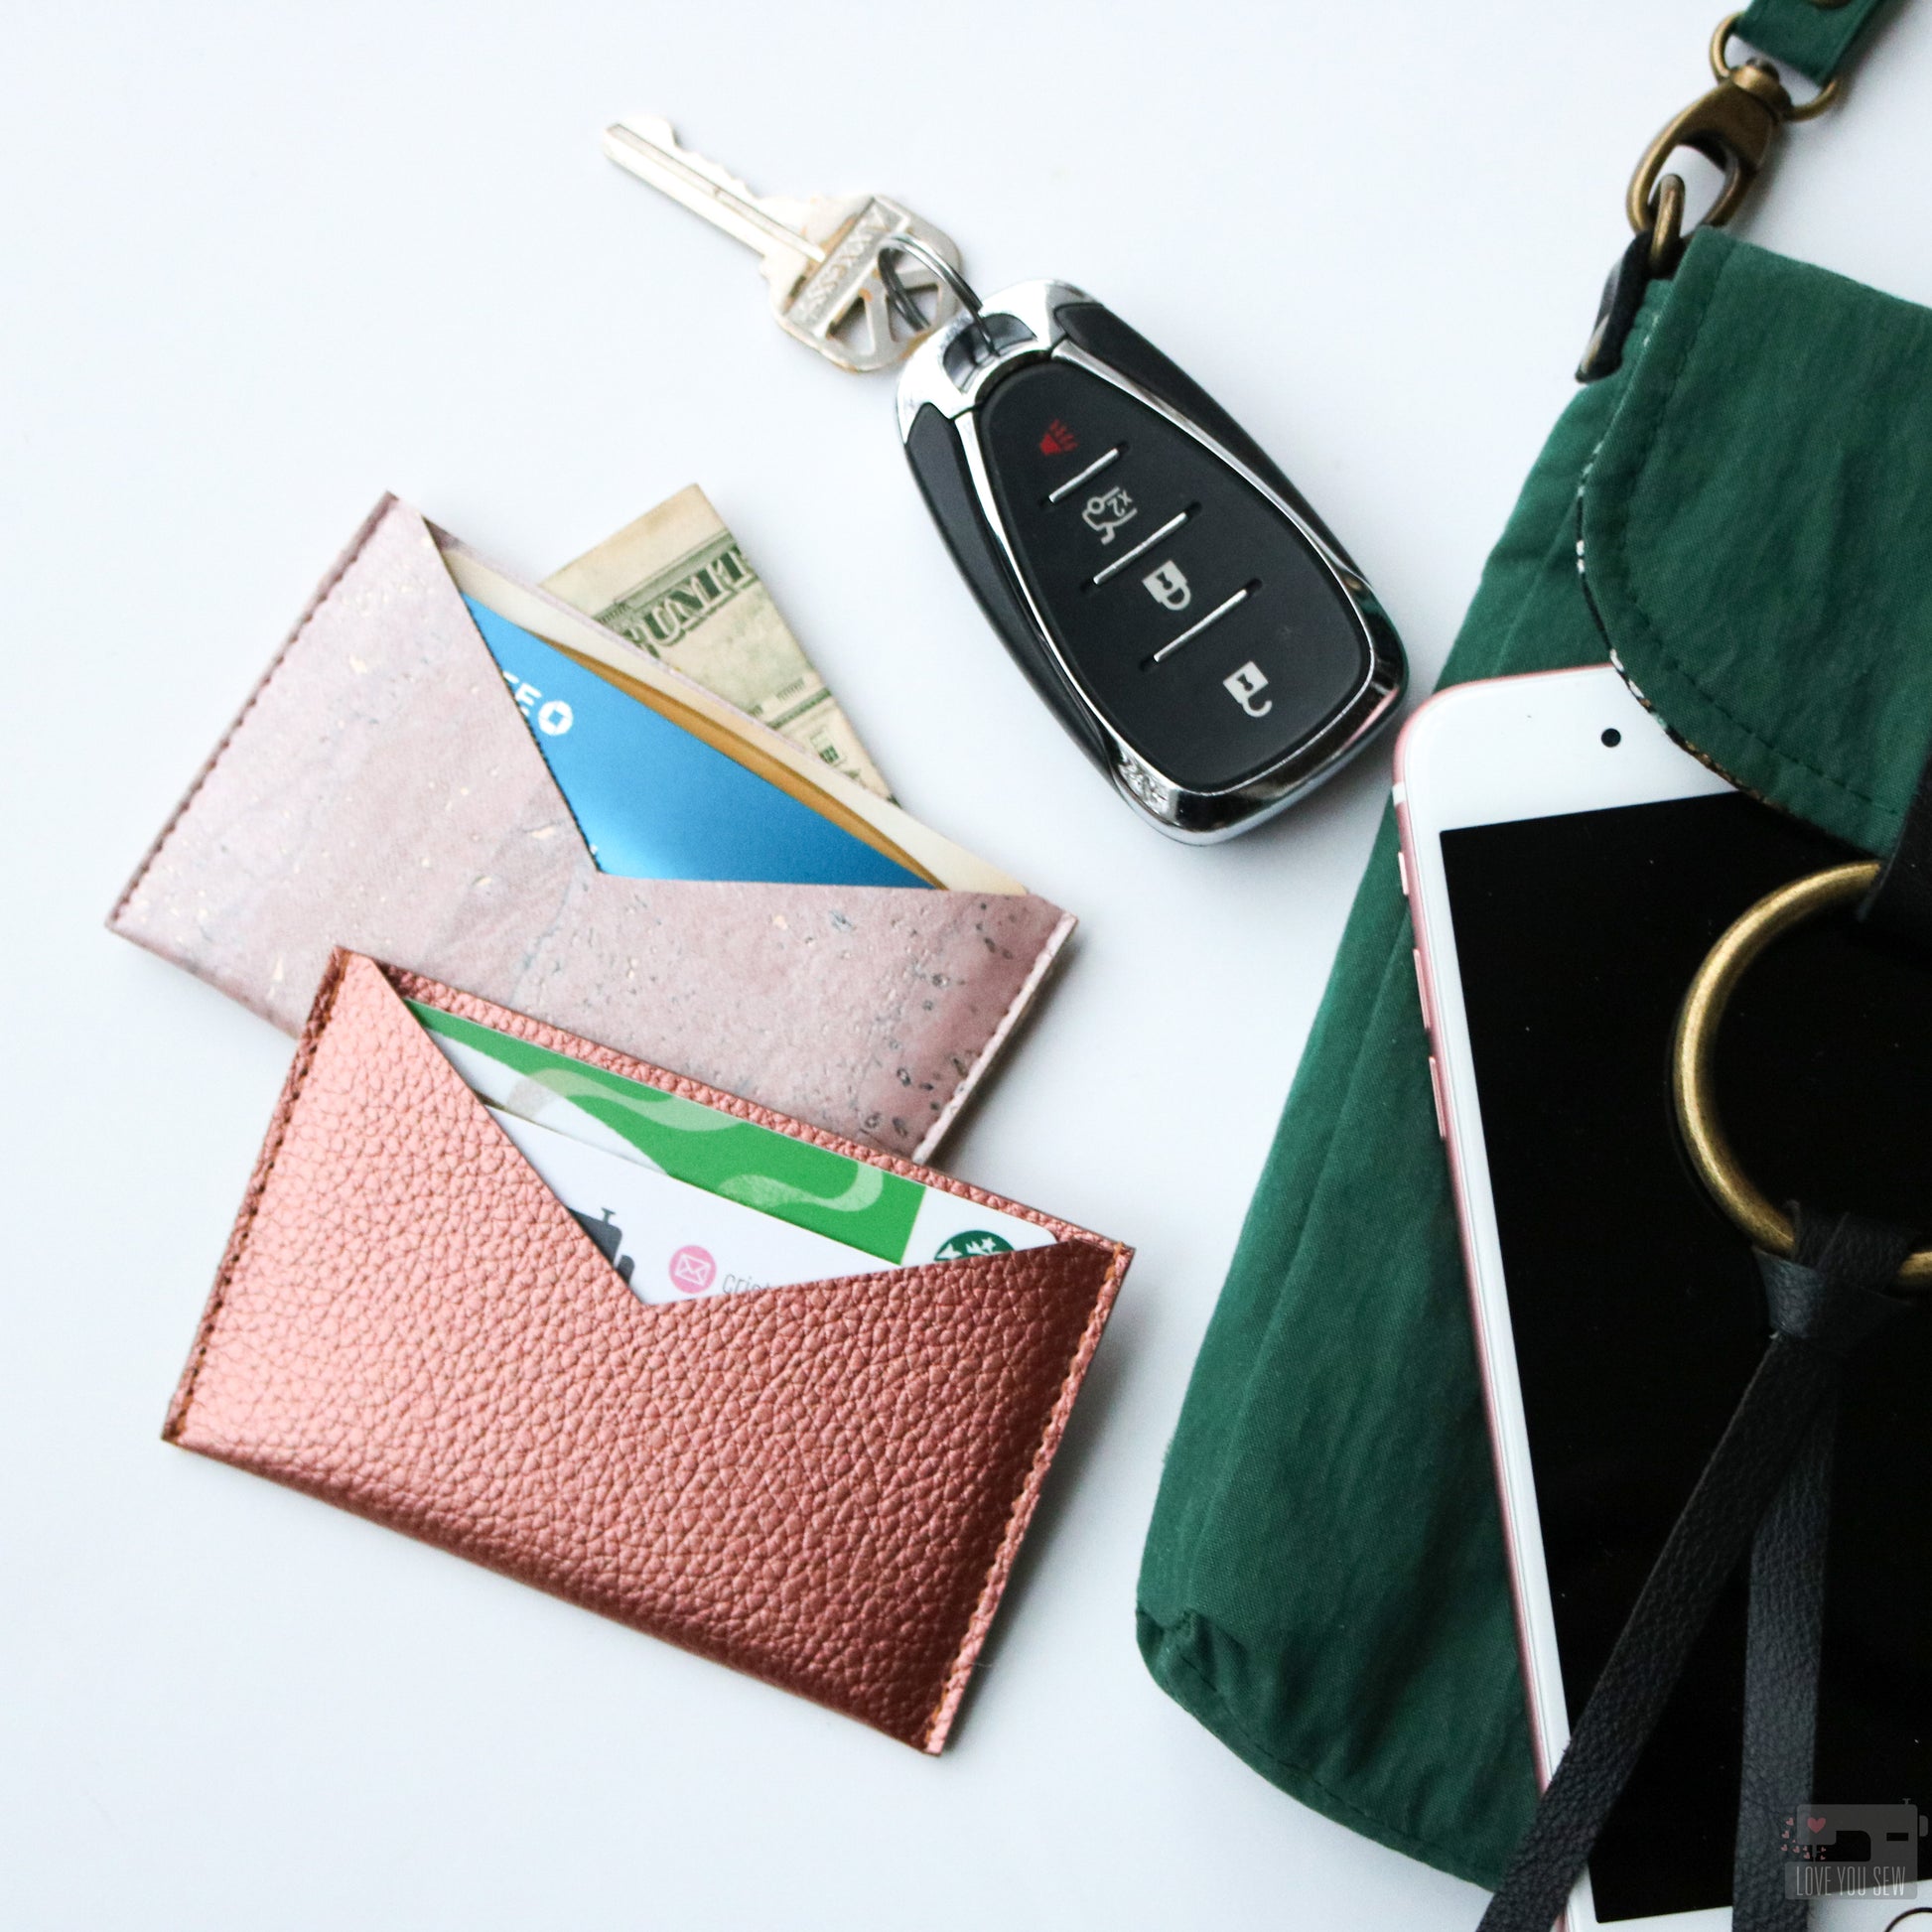 The Card Holder - Sewing Tutorial 